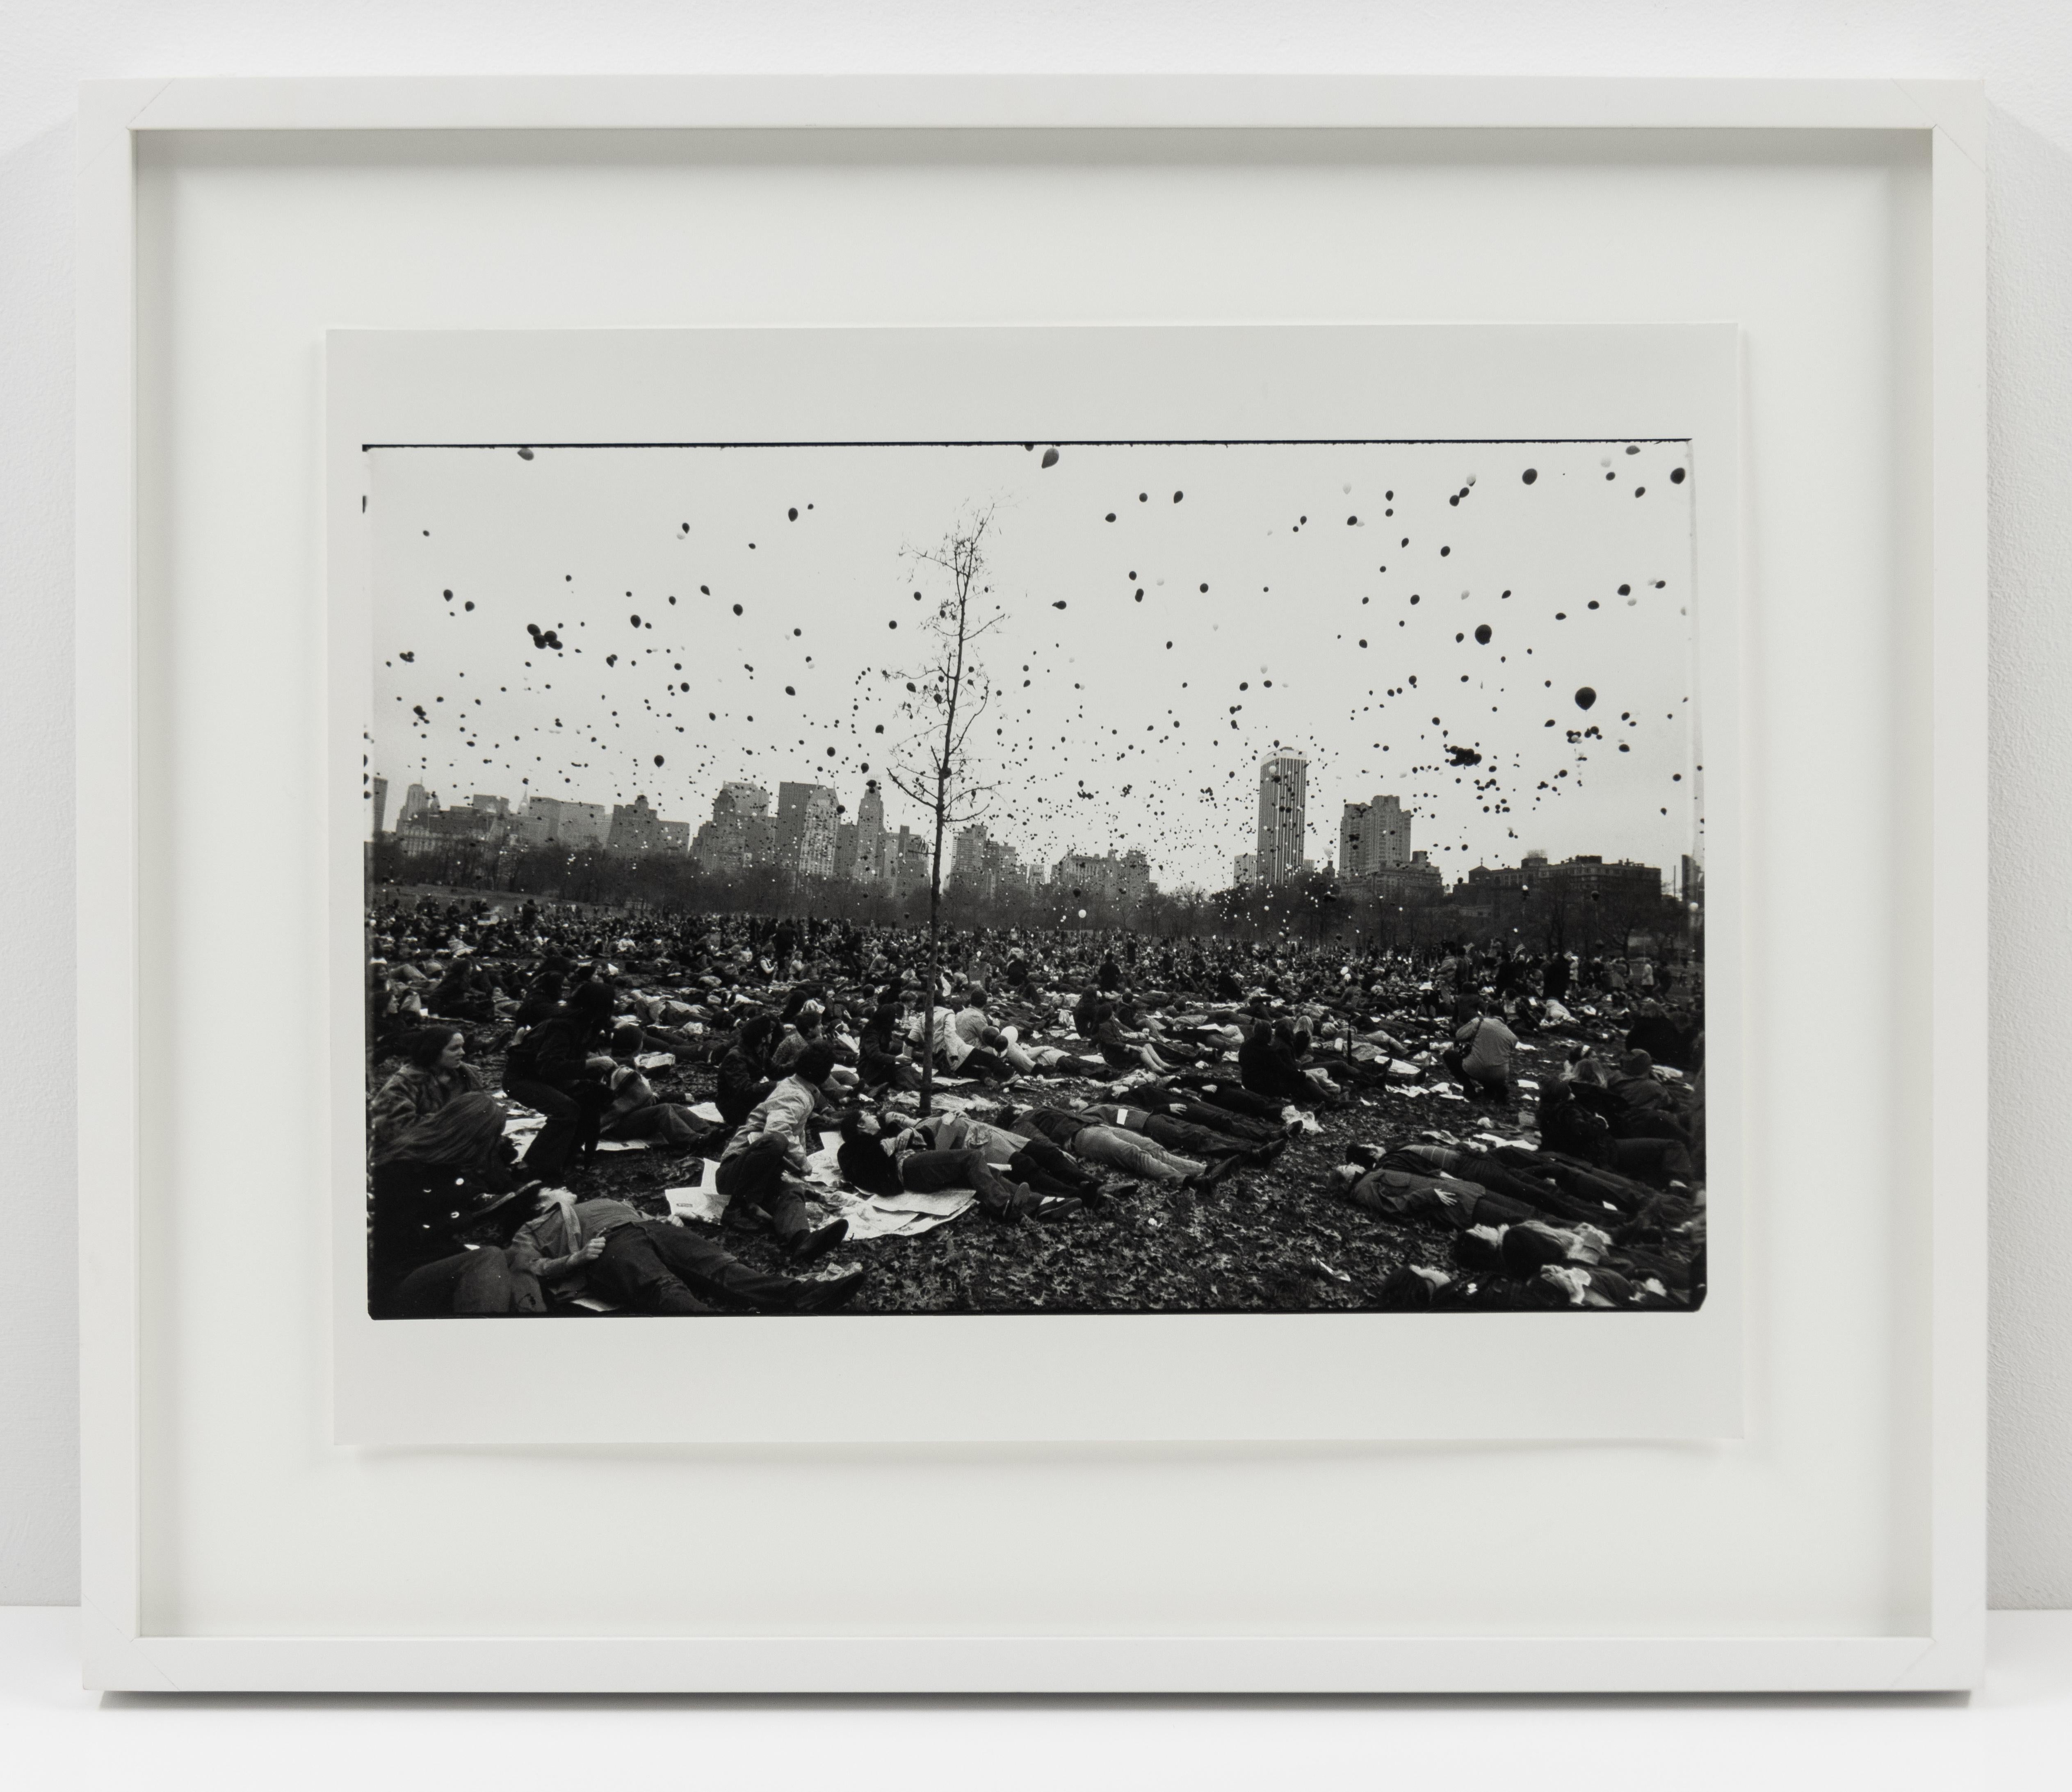 Peace Demonstration, Central Park, New York - Print by Garry Winogrand